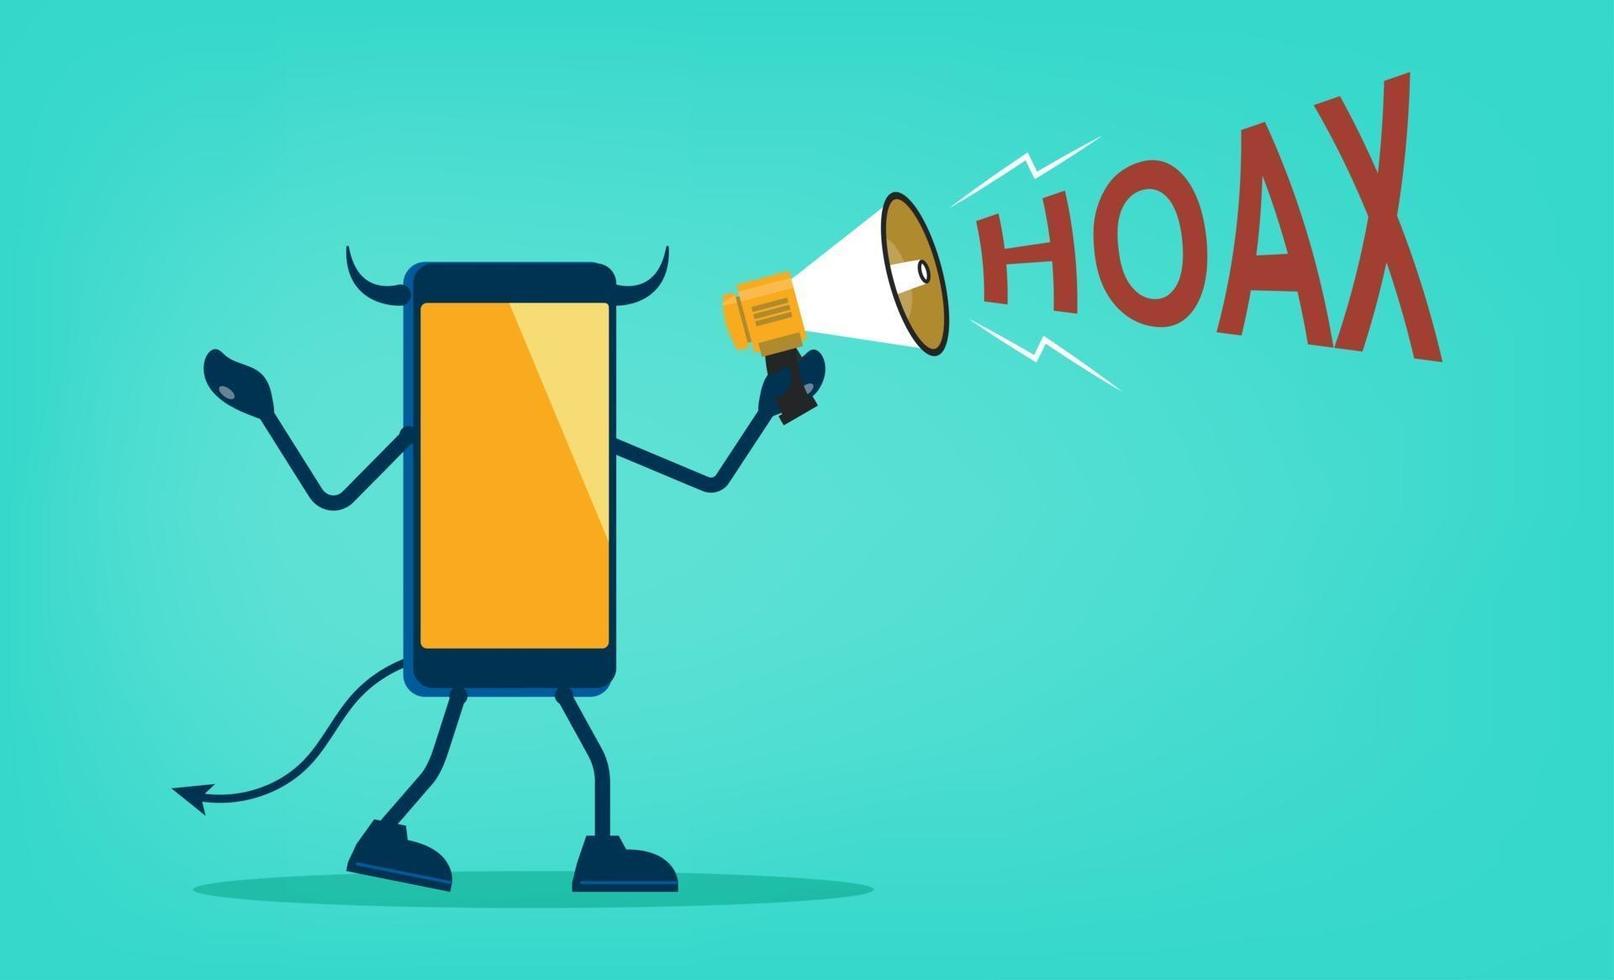 Hoax fake news or messages flat vector illustration